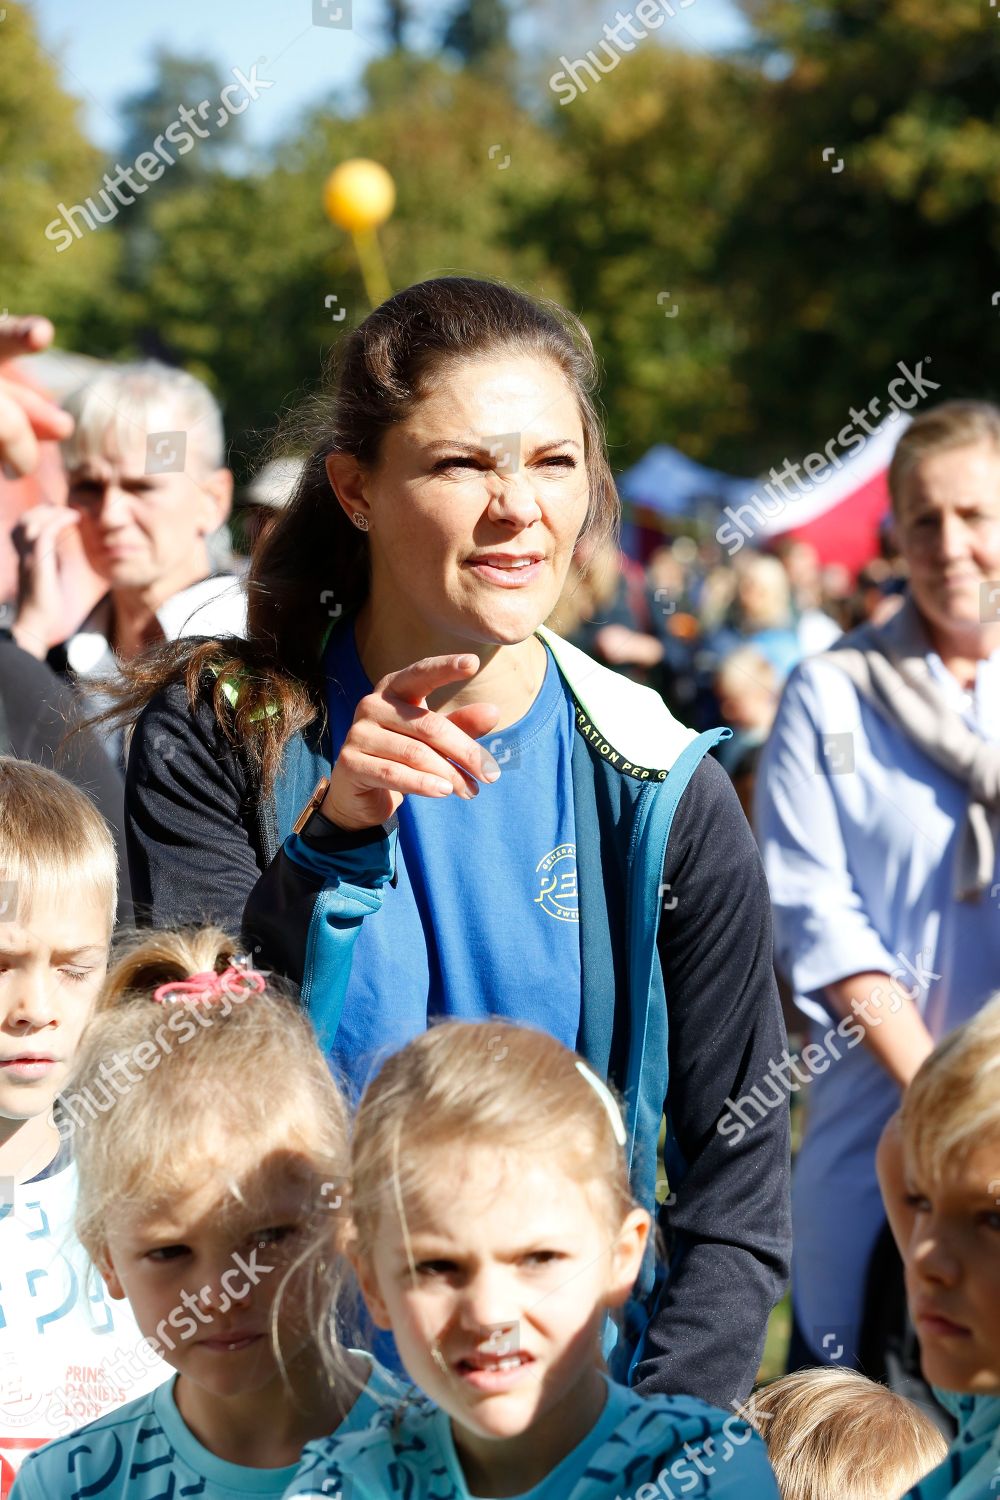 race-and-pep-day-stockholm-sweden-shutterstock-editorial-9884111e.jpg